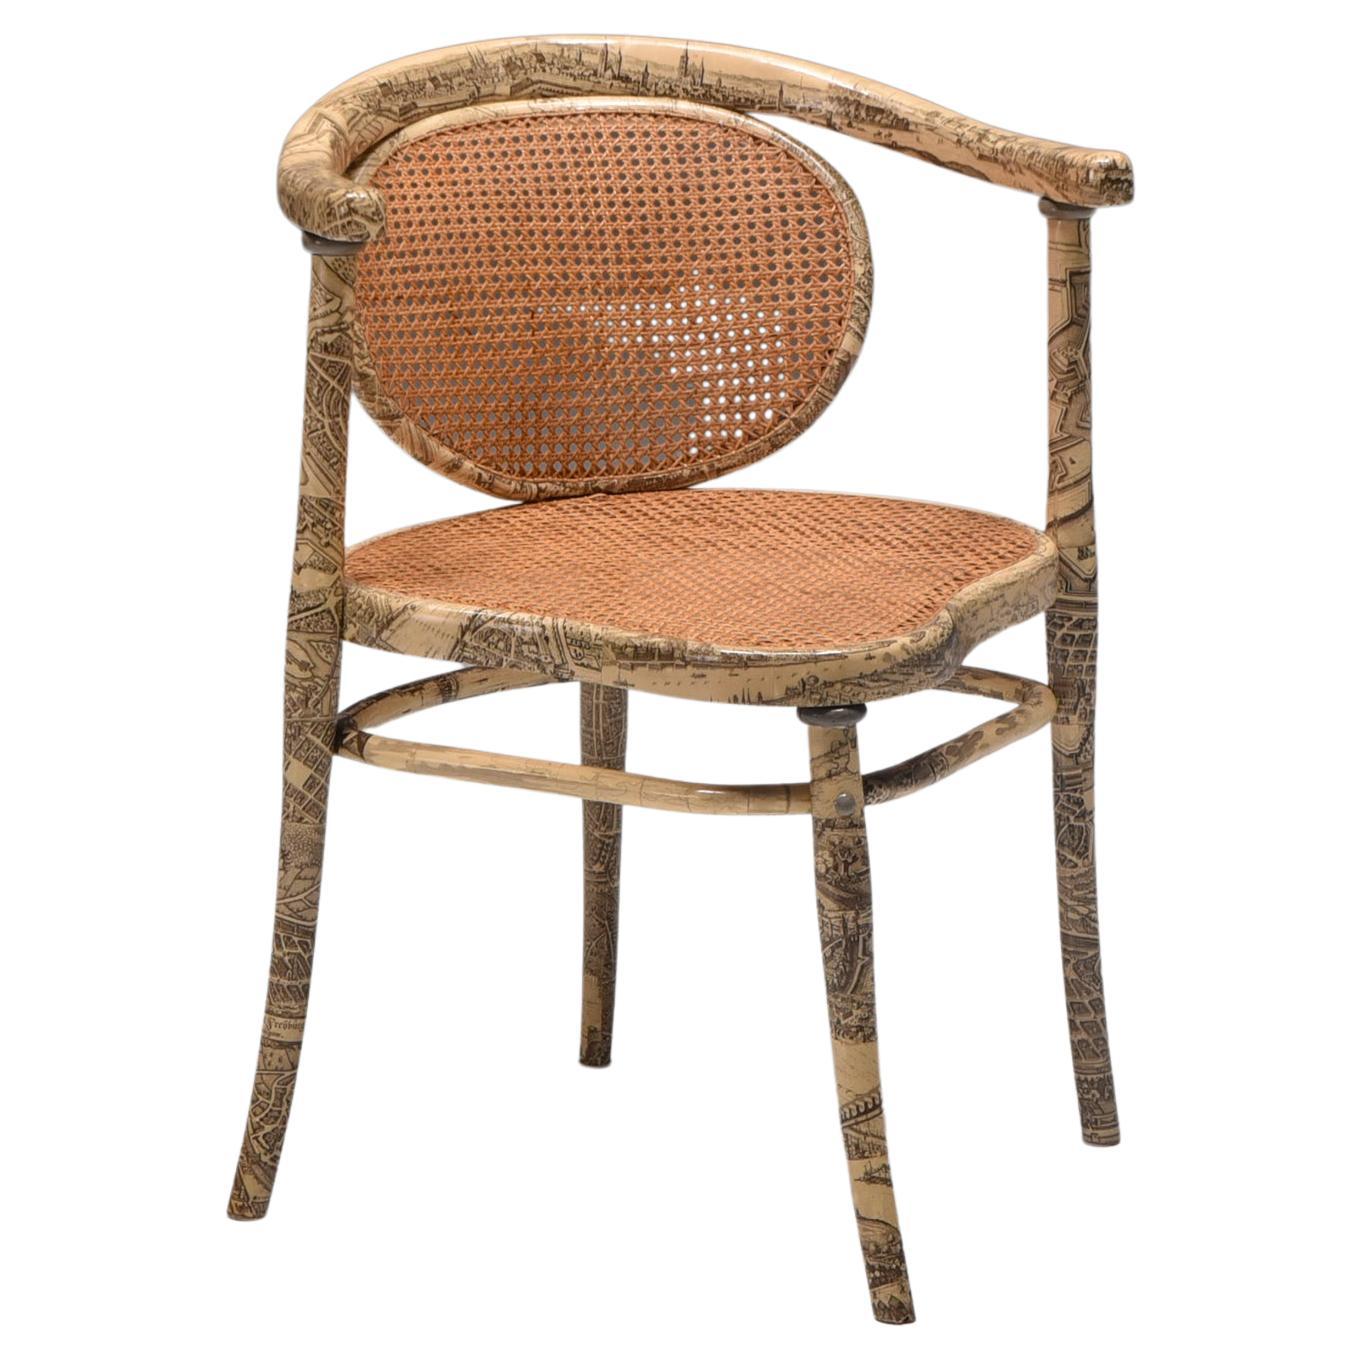 Thonet Assymetrical Chair with Fornasetti Style Print, Empire, 1905